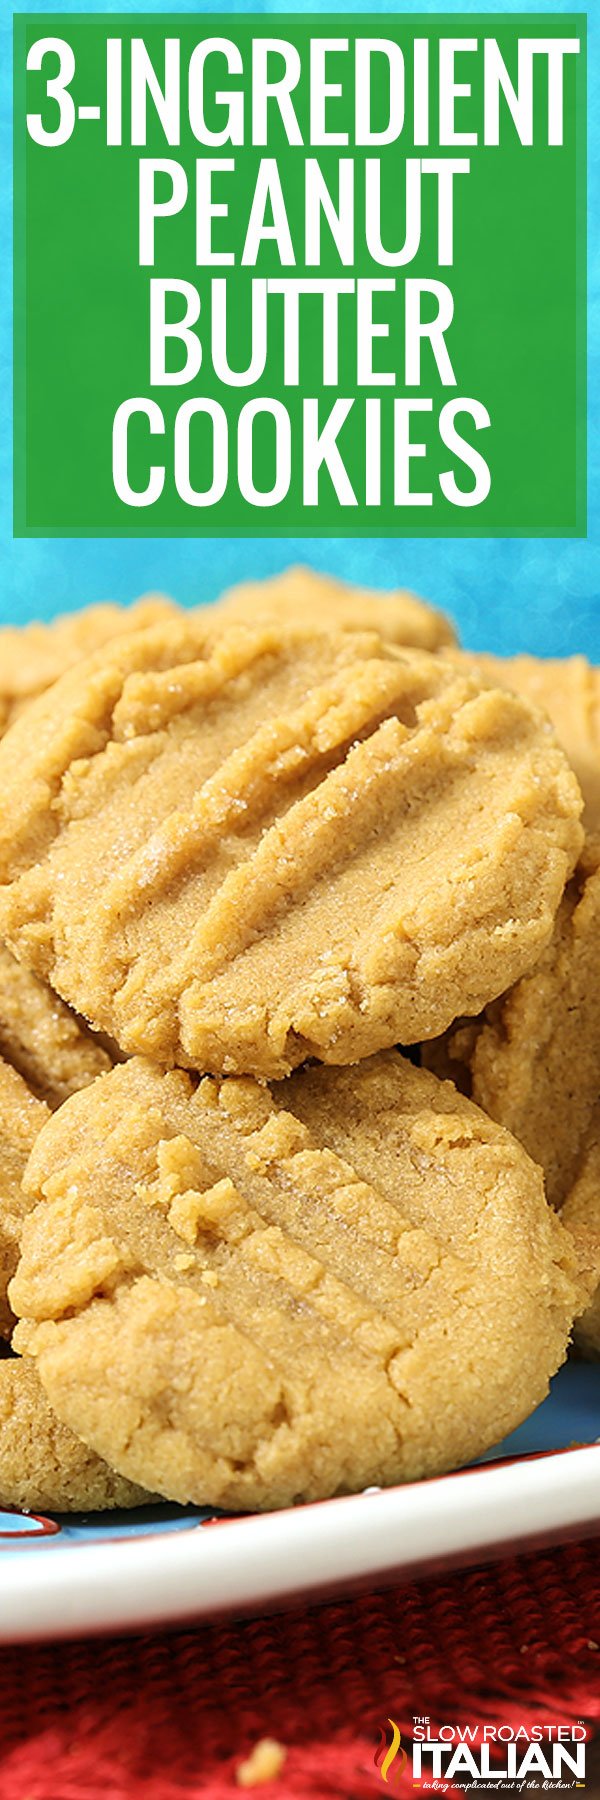 titled image (and shown): 3 Ingredient Peanut Butter Cookies